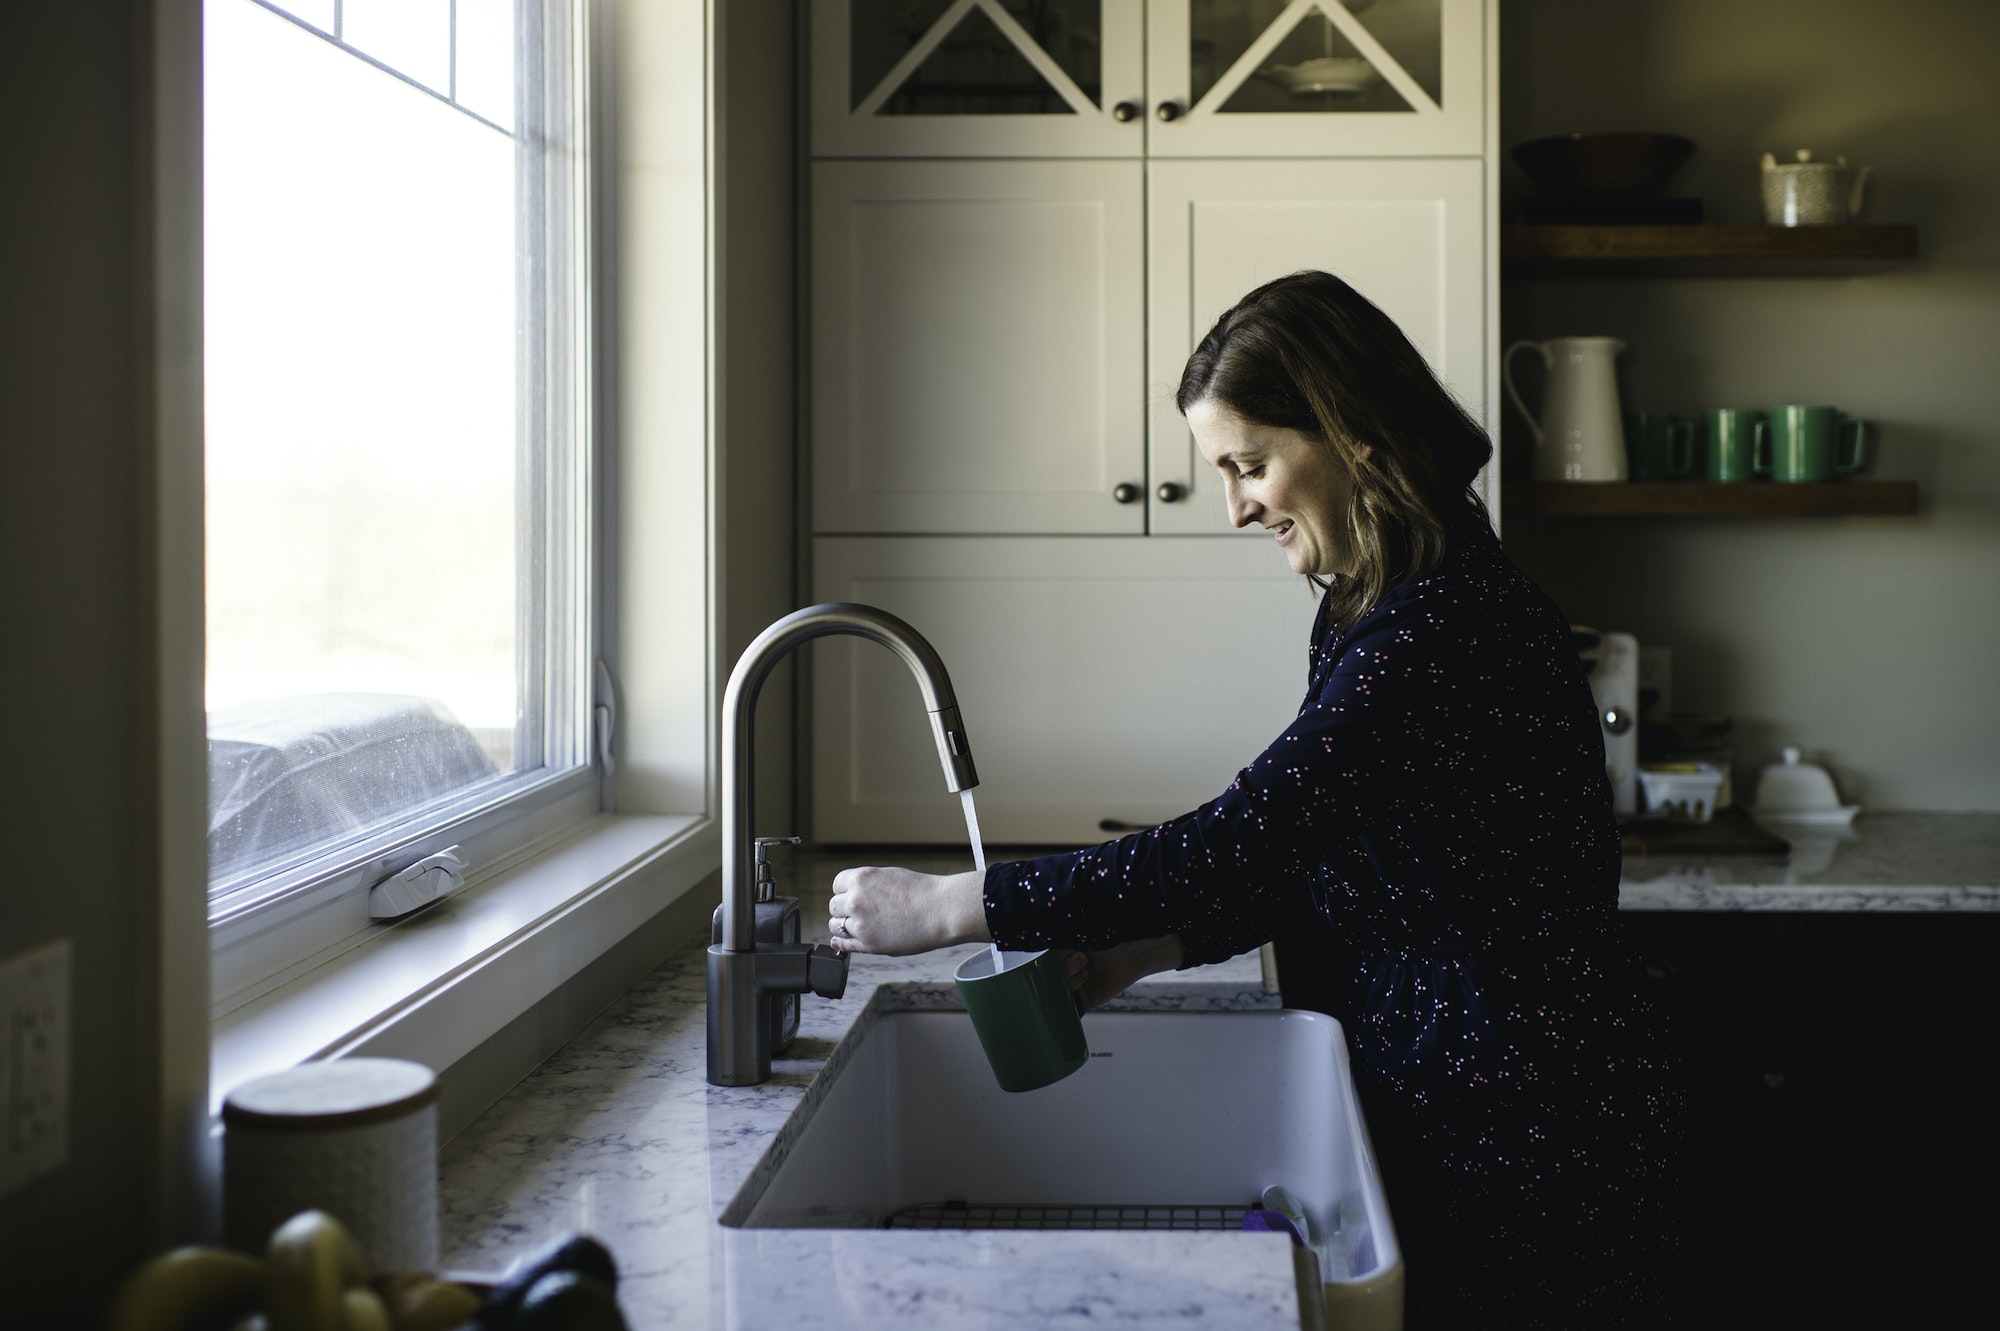 Woman filling up cup at kitchen sink